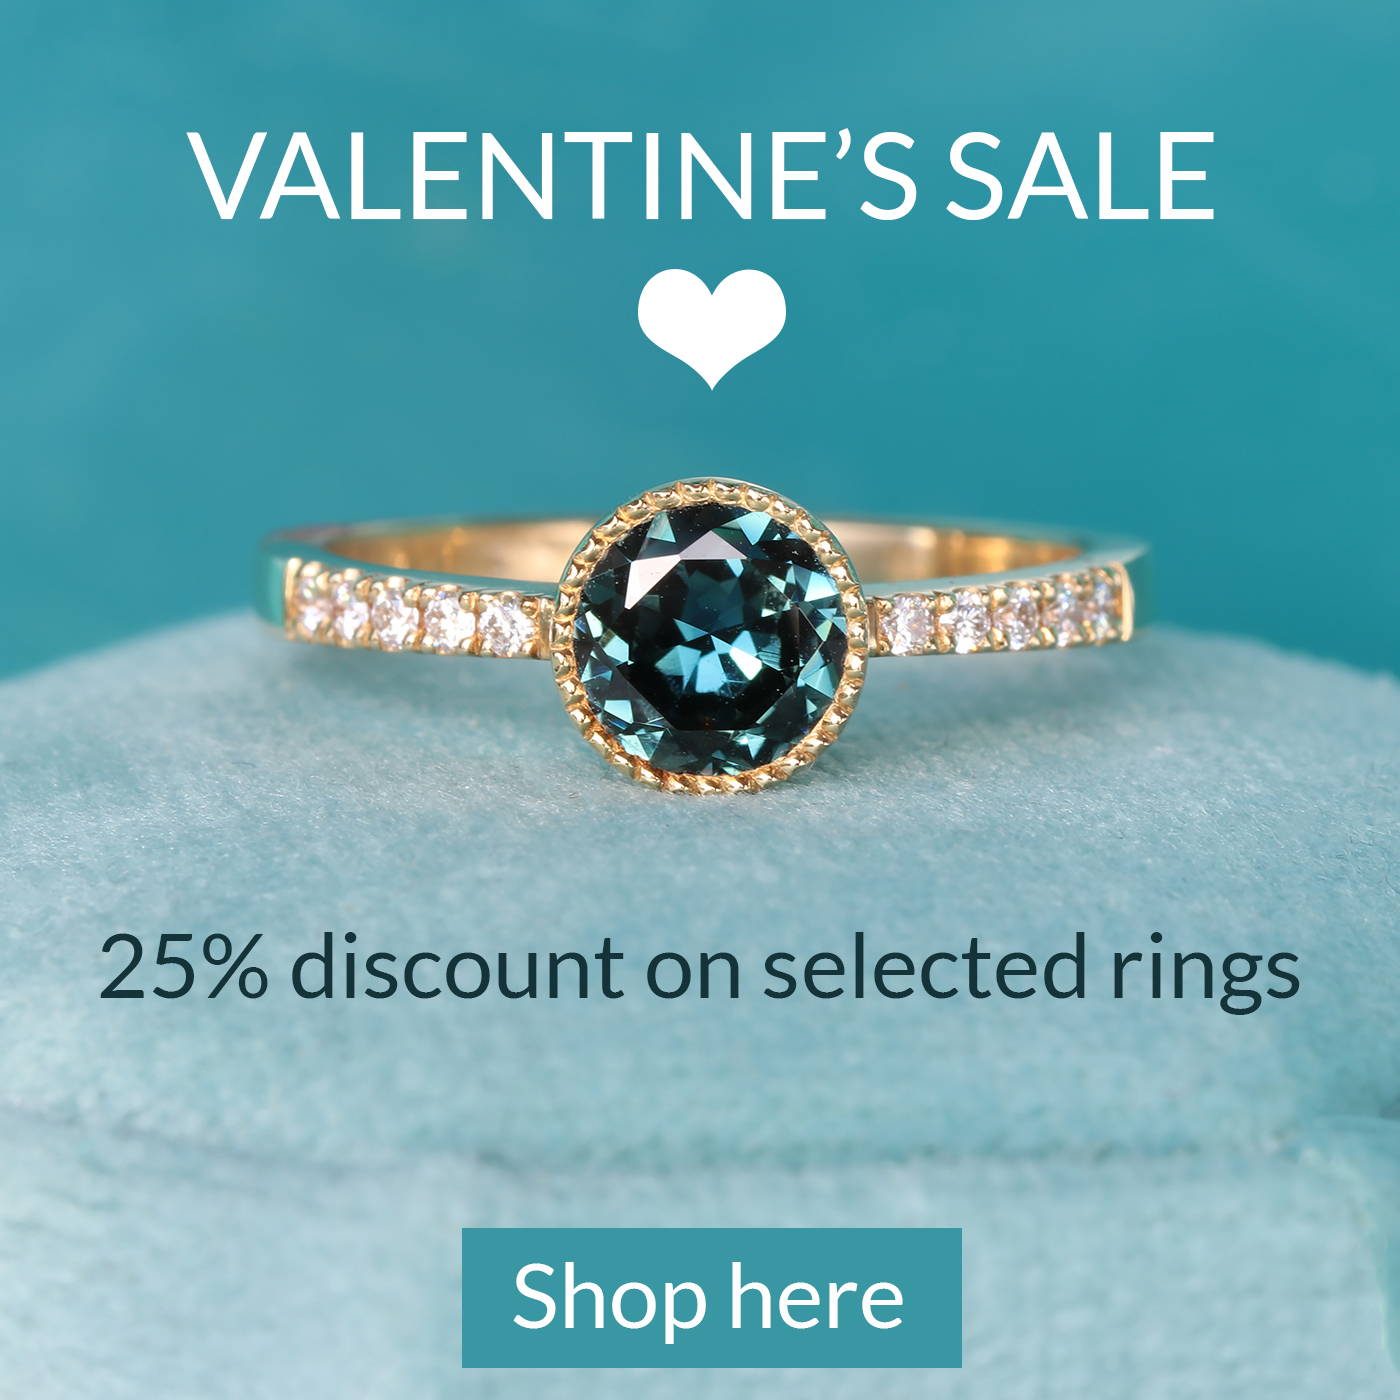 Valentine's Sale - 25% off selected engagement rings